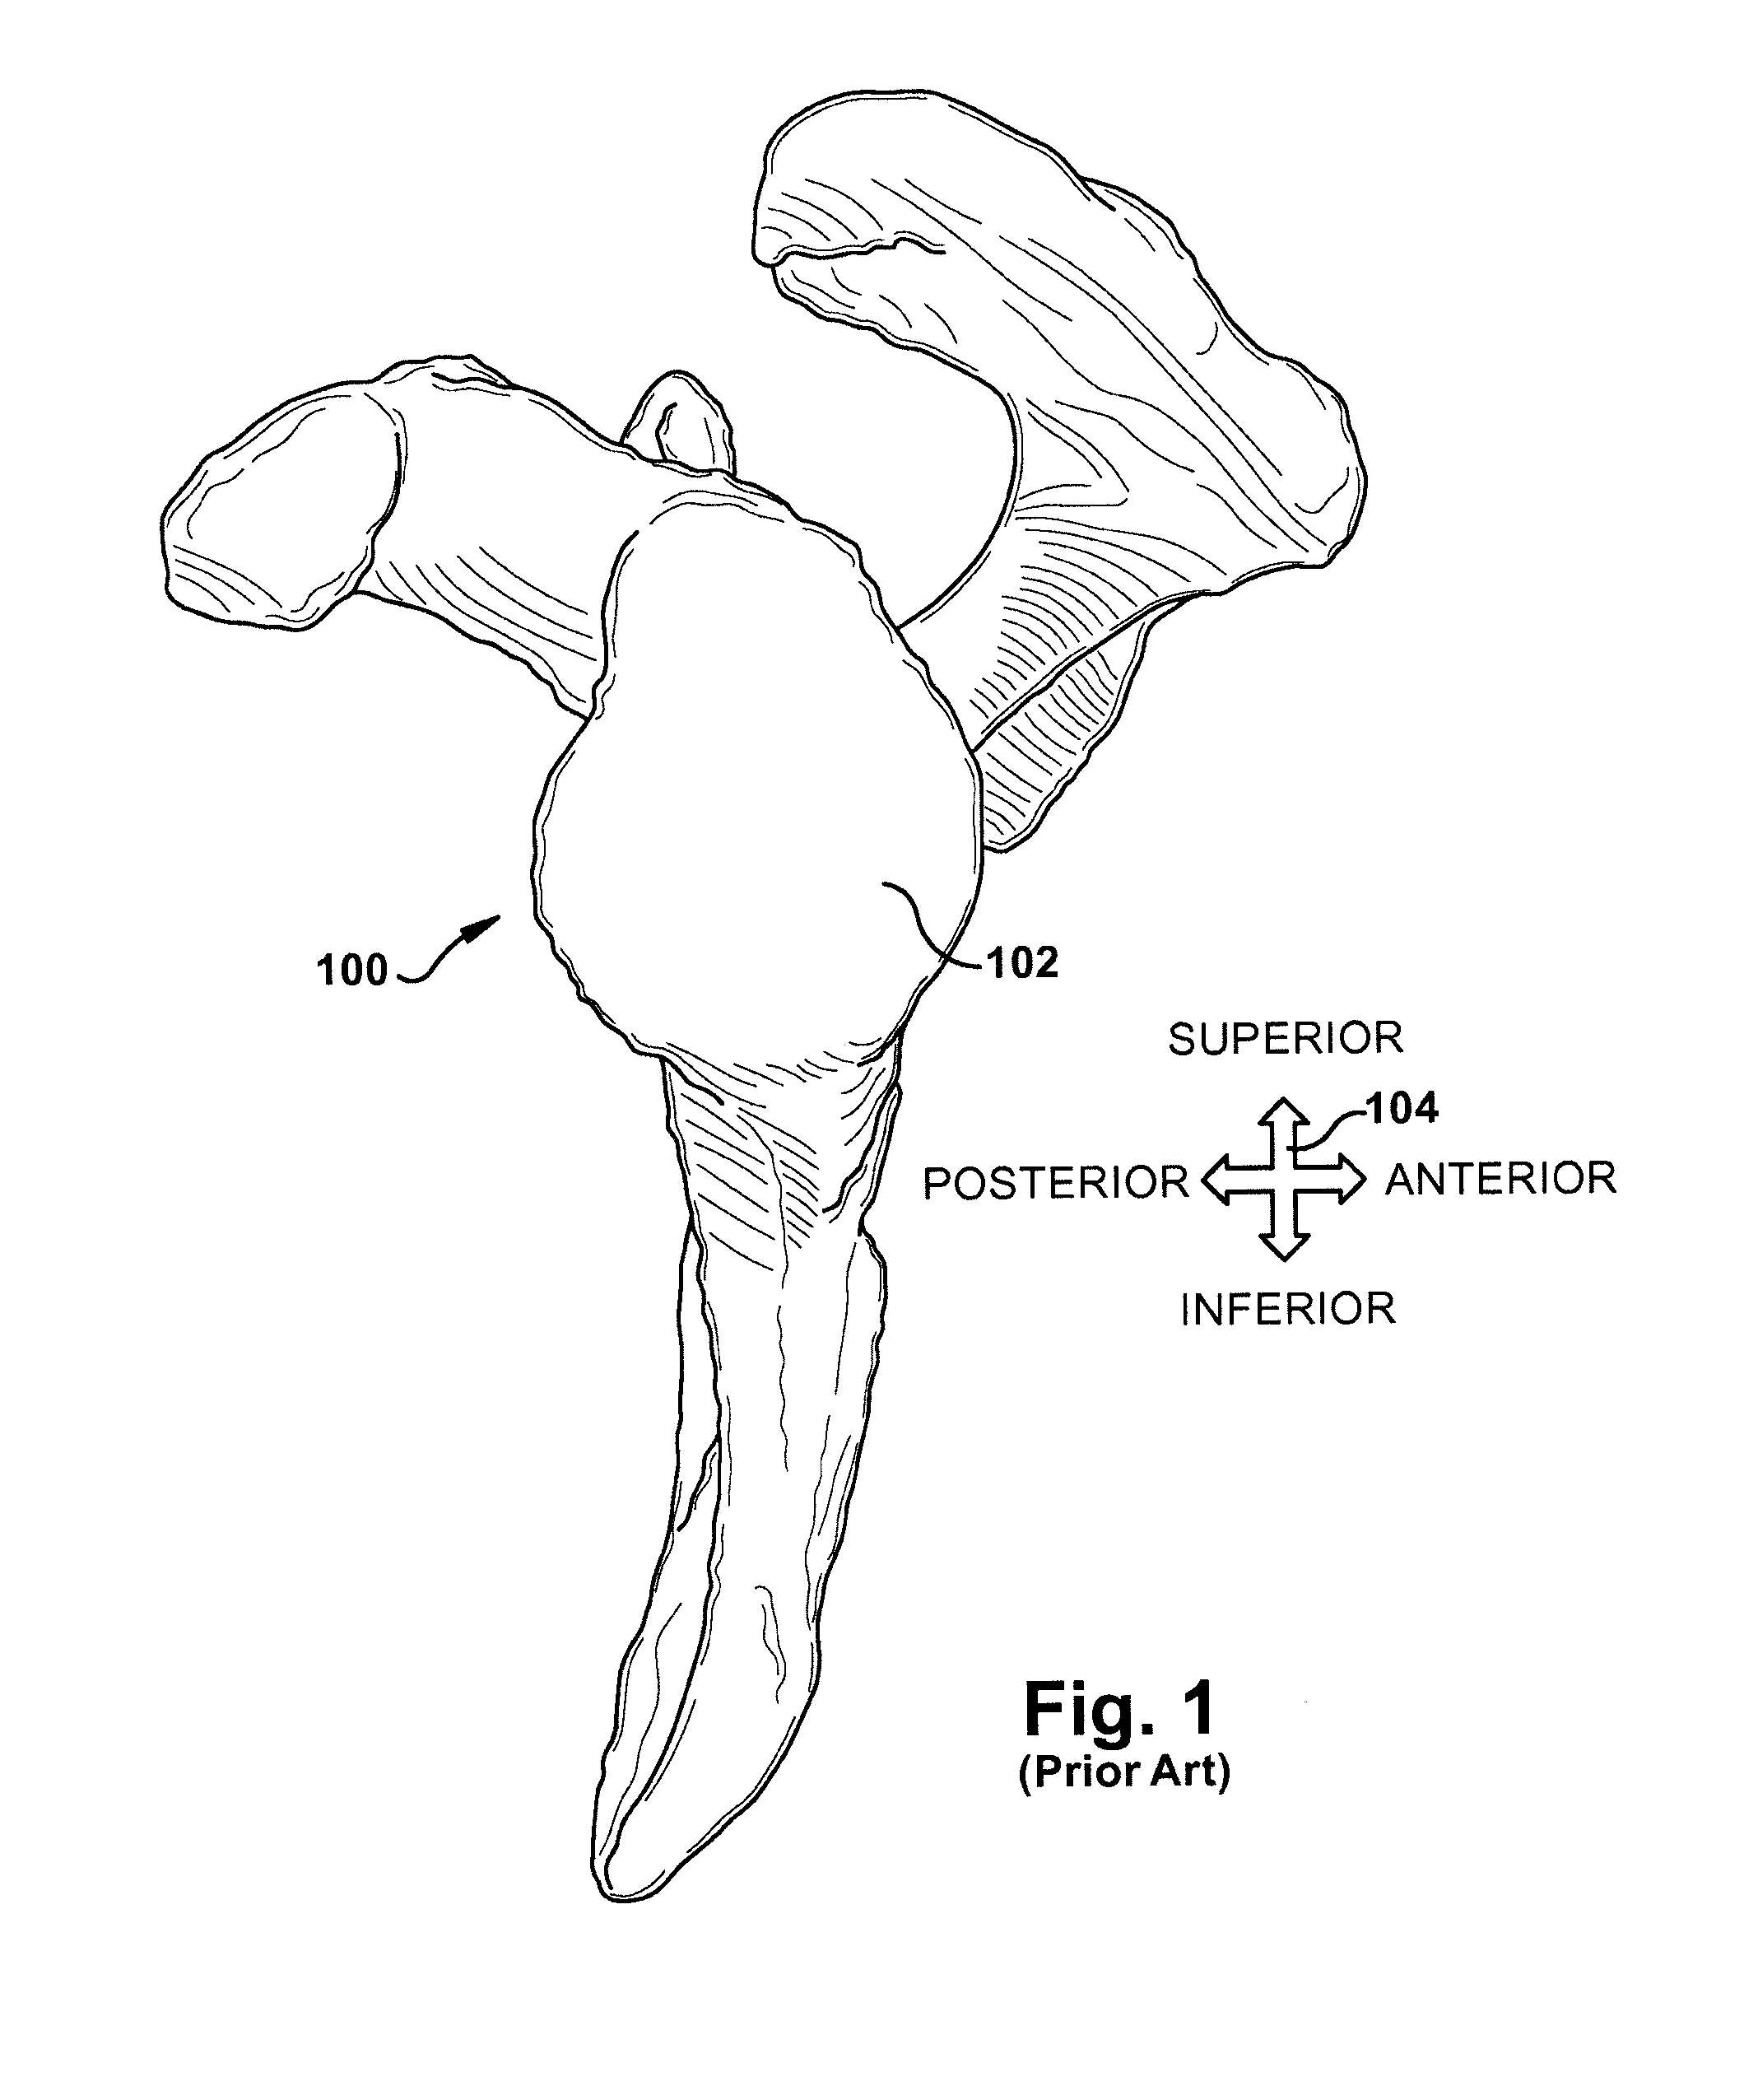 Guide for assisting with arrangement of a stock instrument with respect to a patient tissue